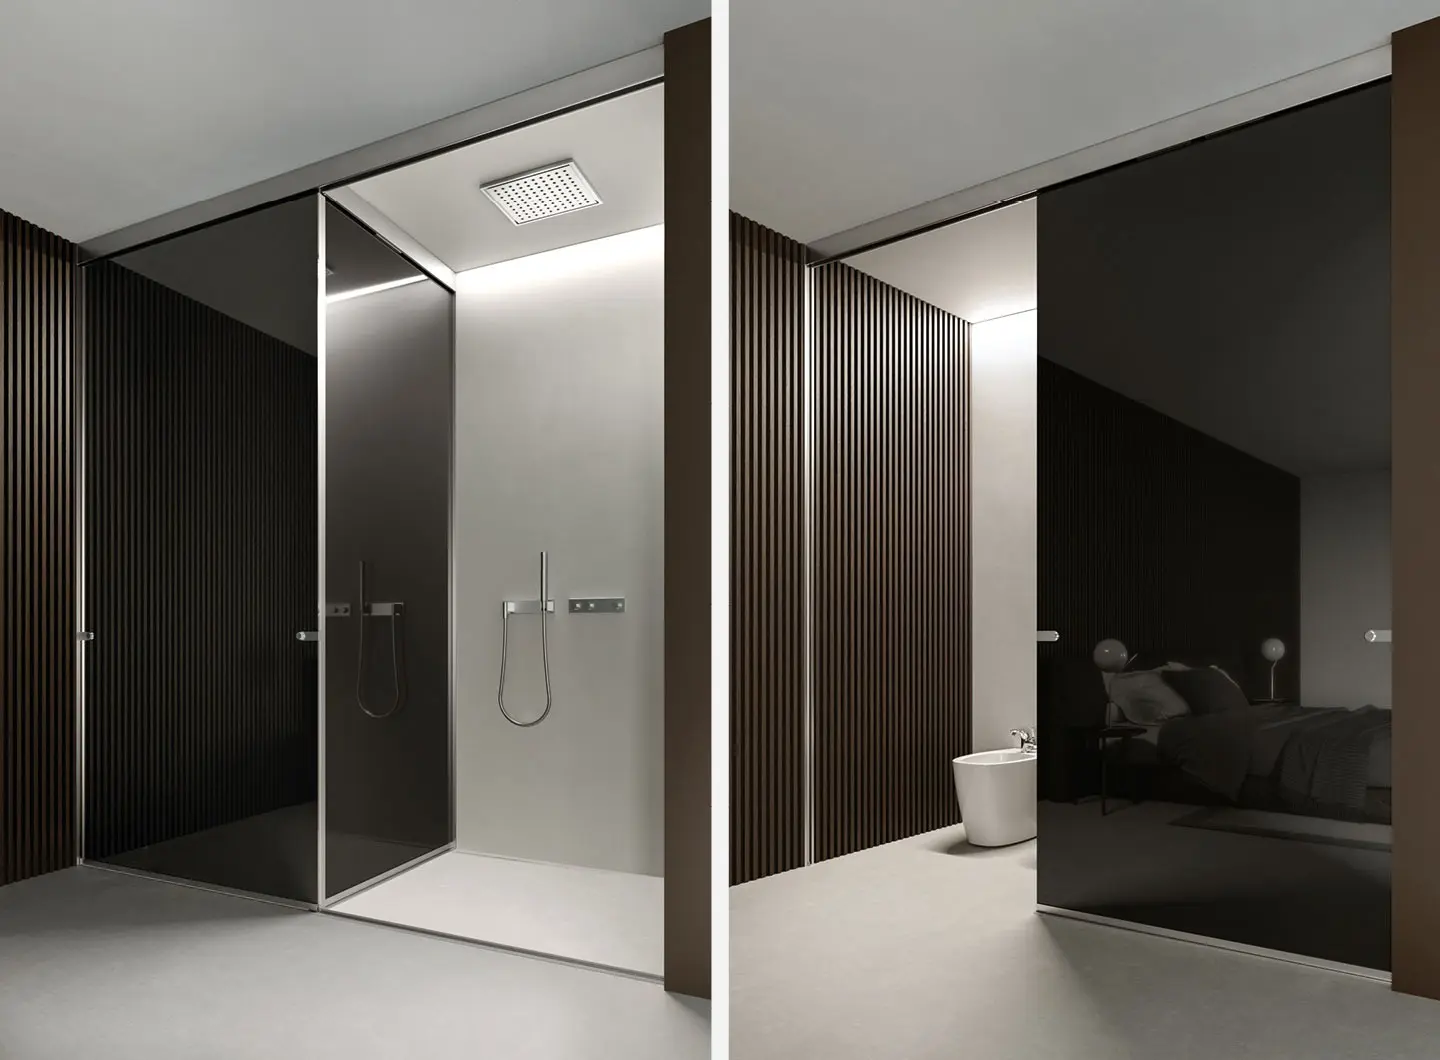 Voile - Glass partition walls for bathrooms and contract - Vismaravetro